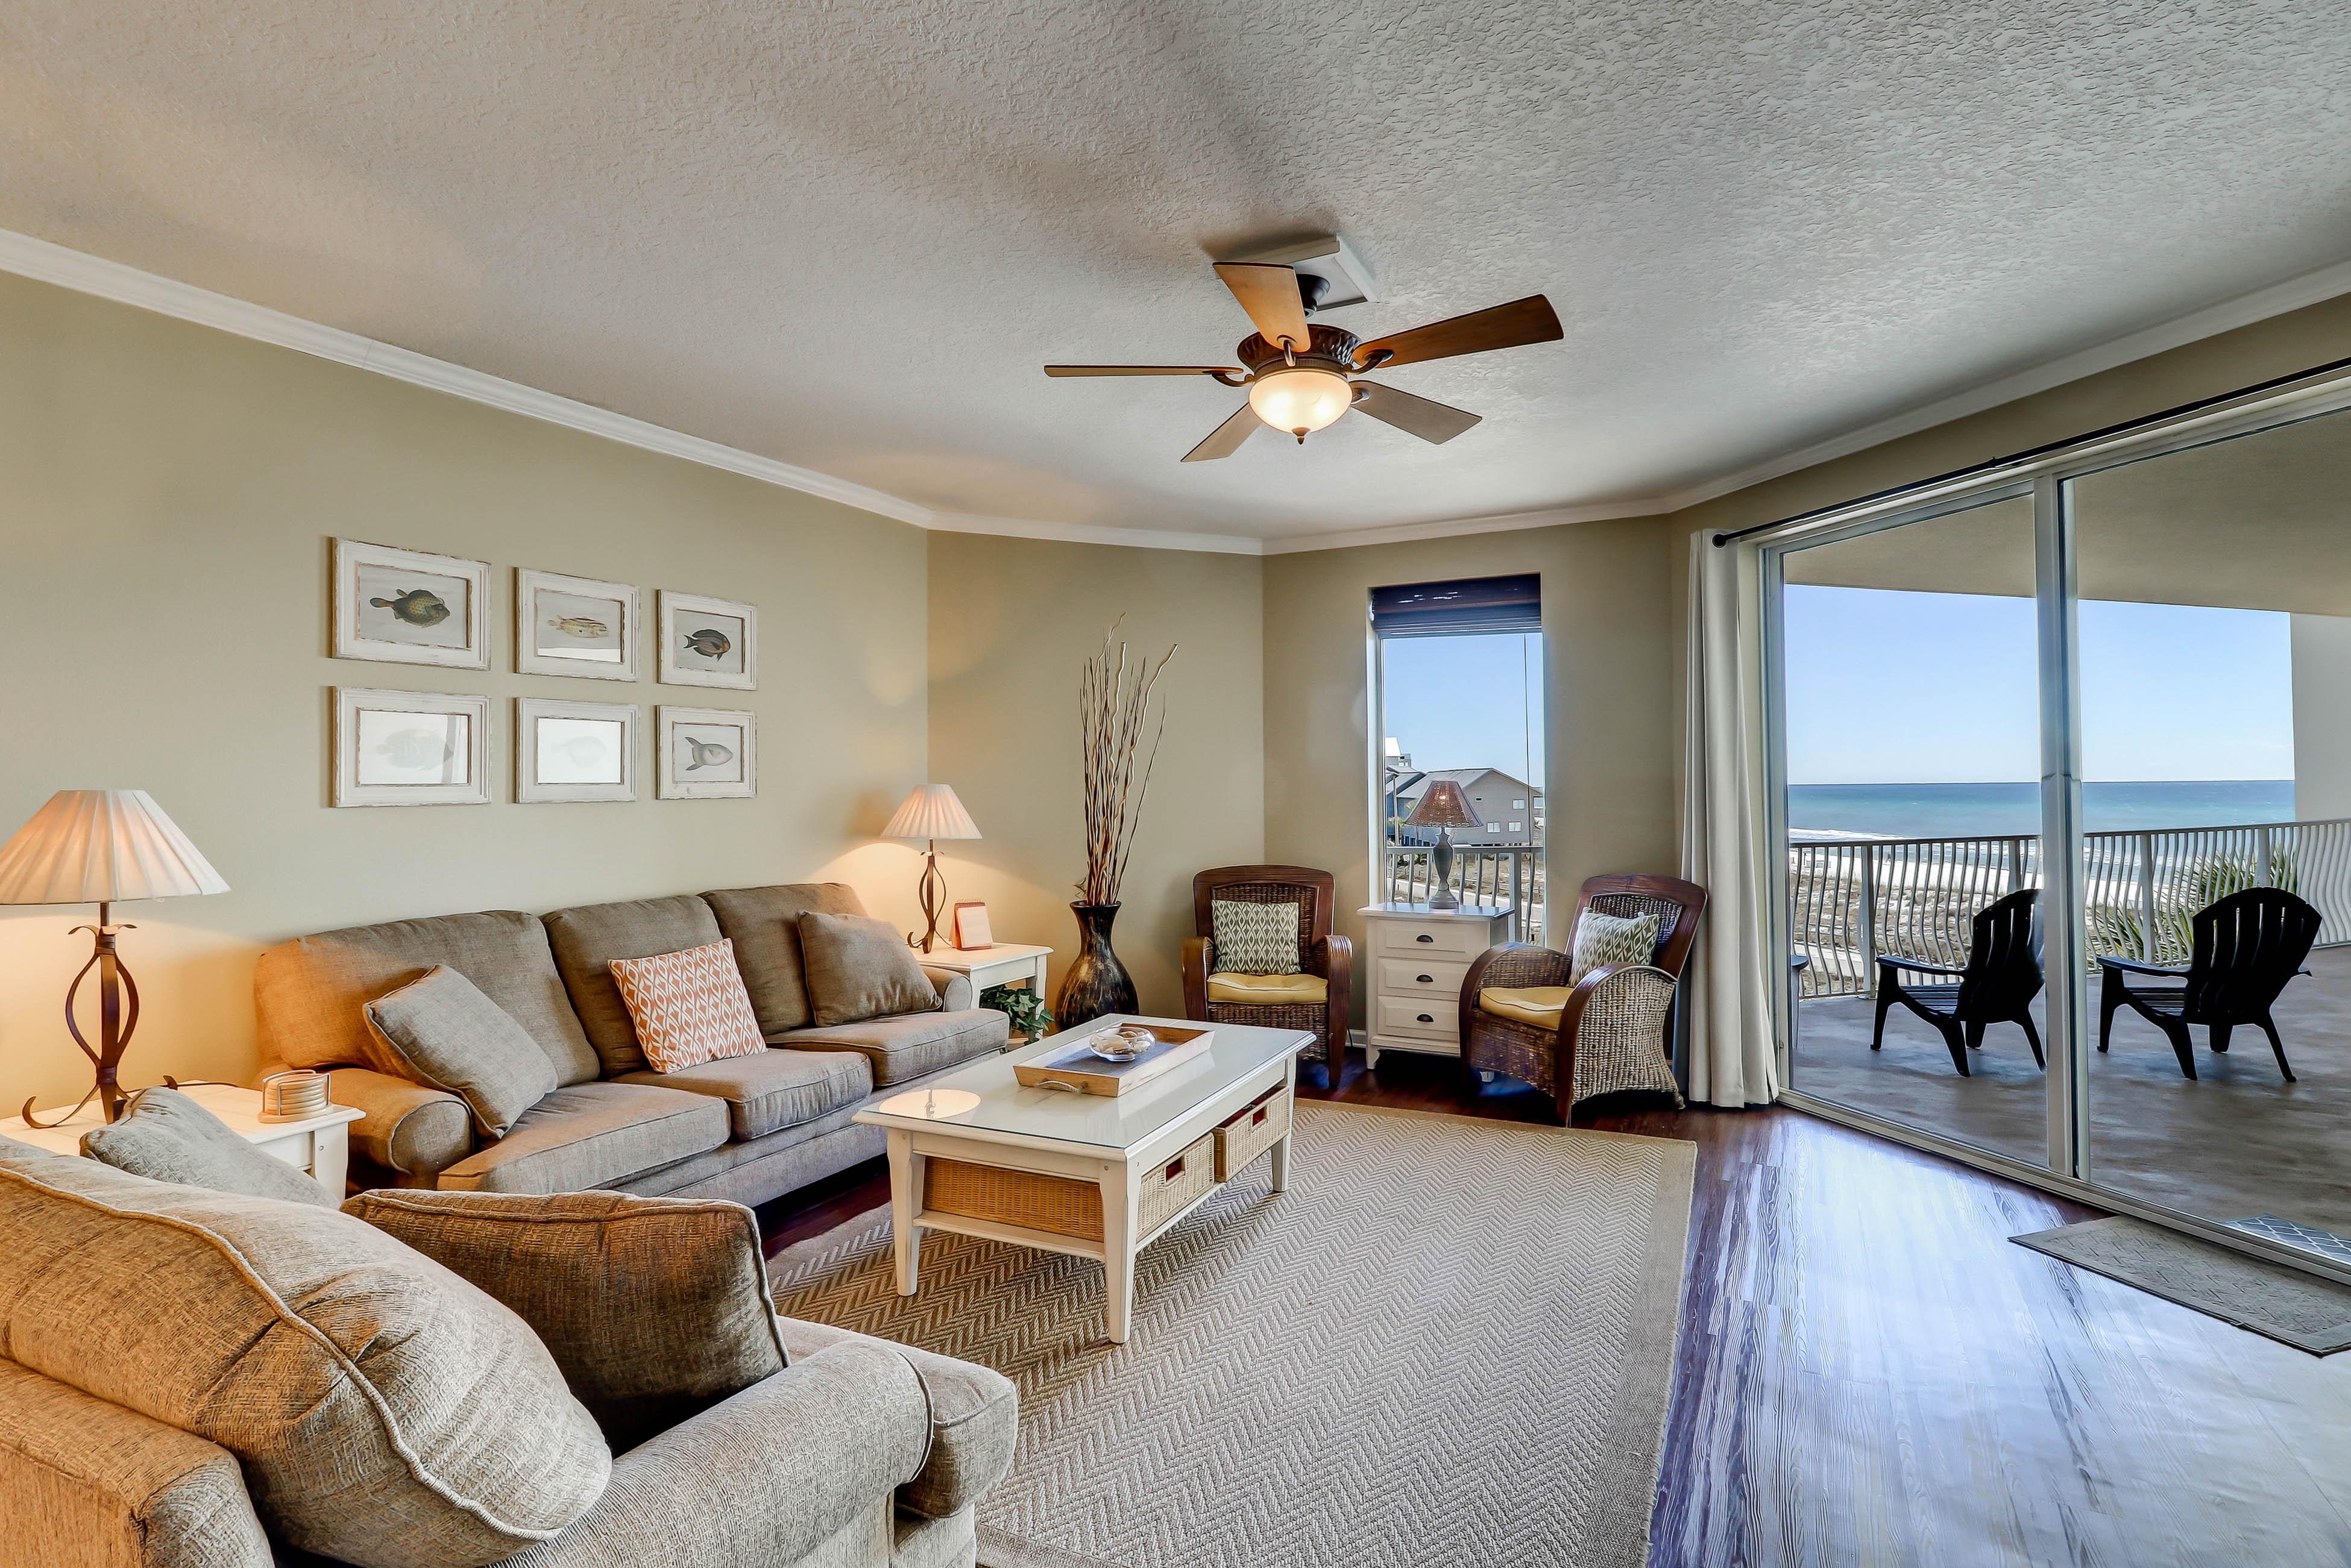 Dunes of Seagrove A307 Condo rental in Dunes of Seagrove in Highway 30-A Florida - #2